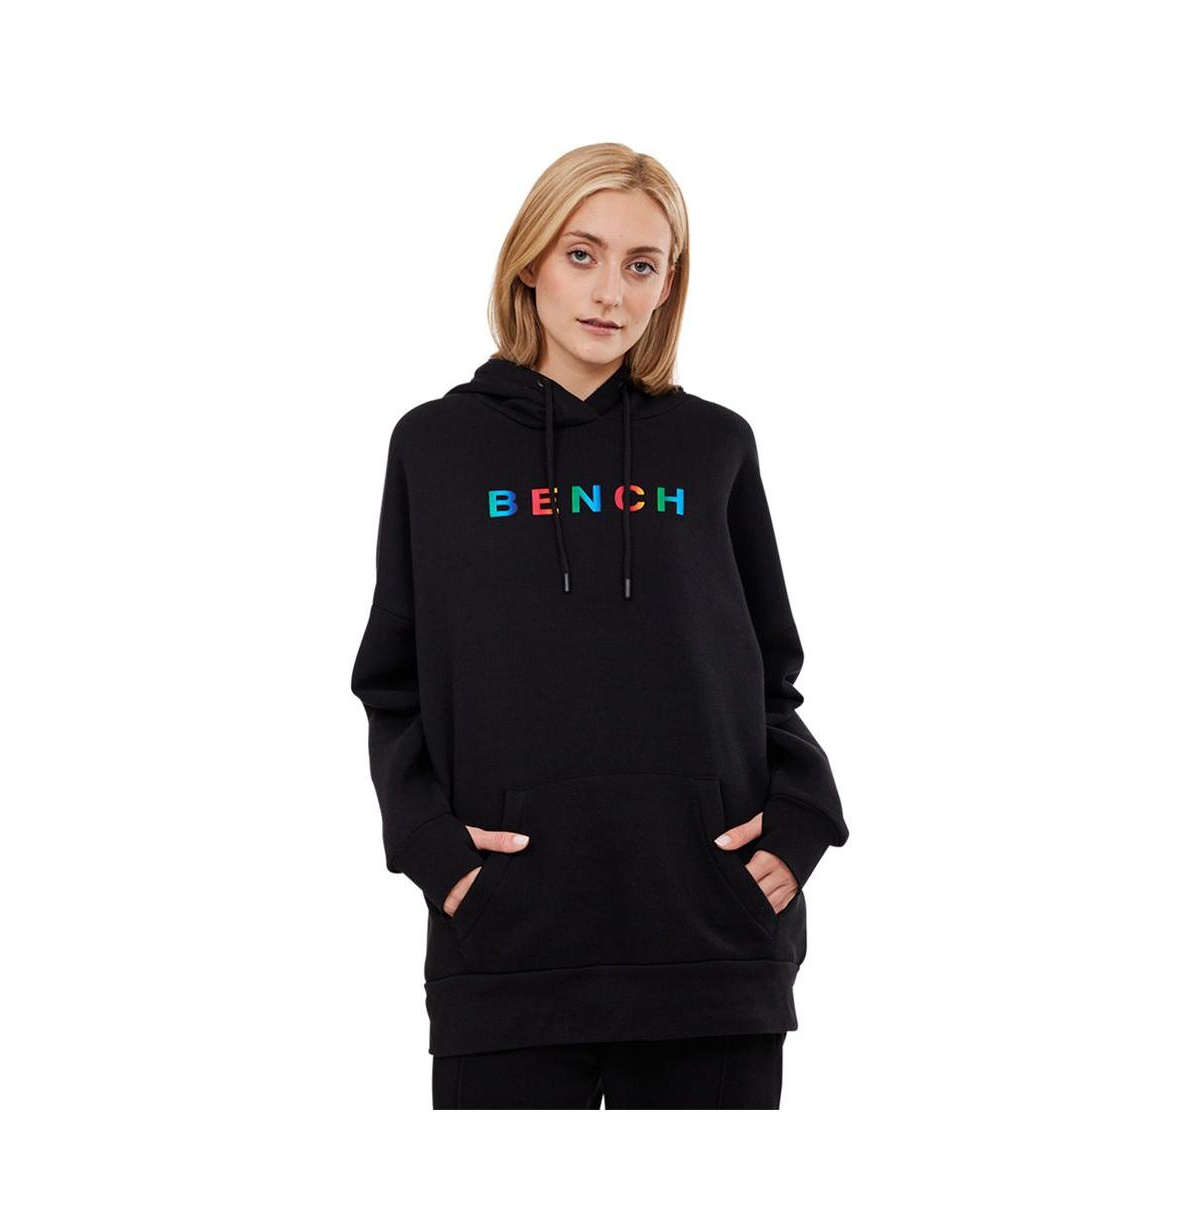  Bench Loxley womens hoodie black with rainbow foil logo at chest